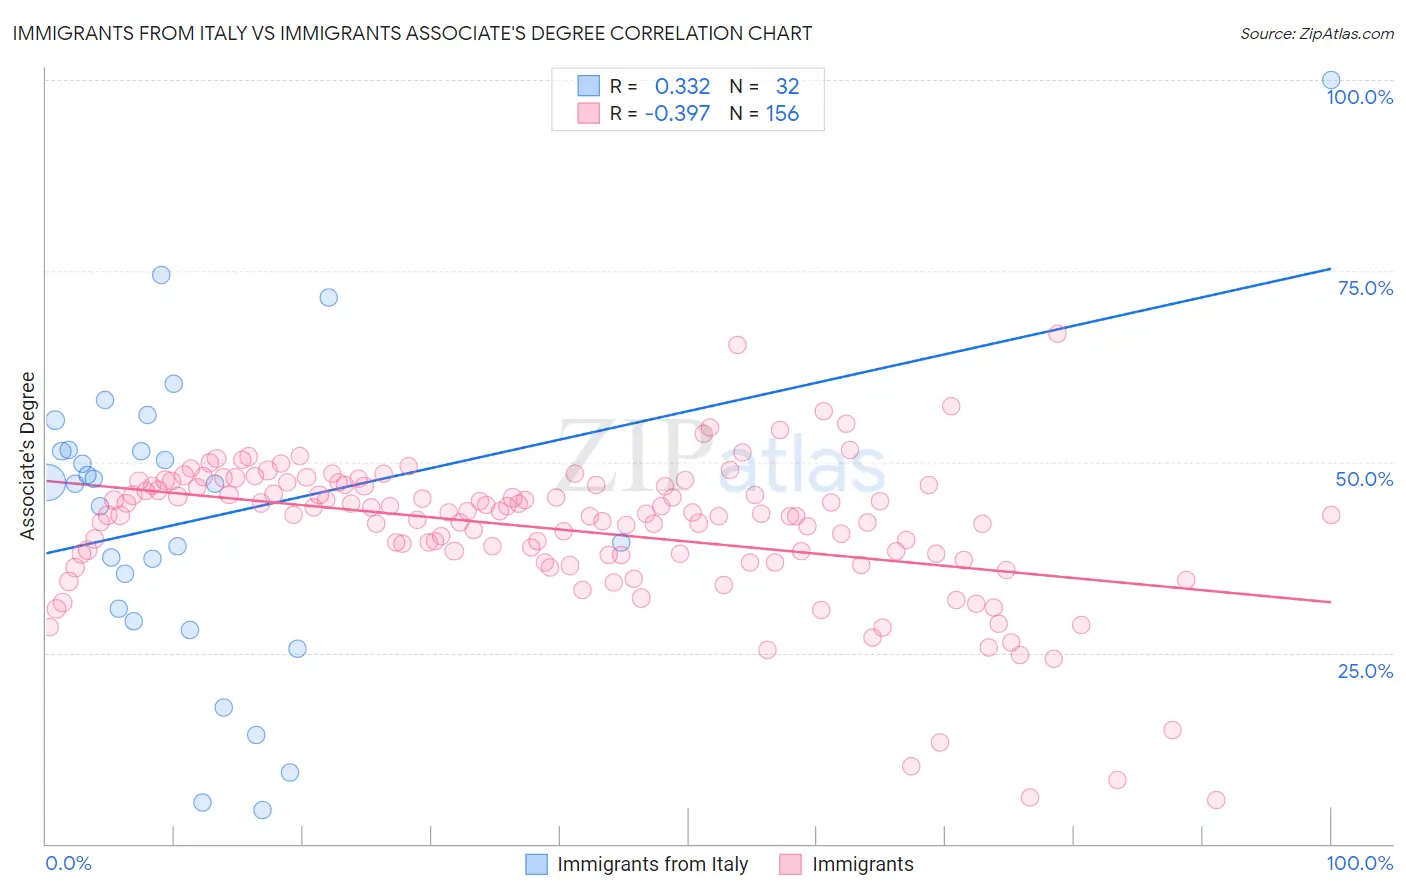 Immigrants from Italy vs Immigrants Associate's Degree